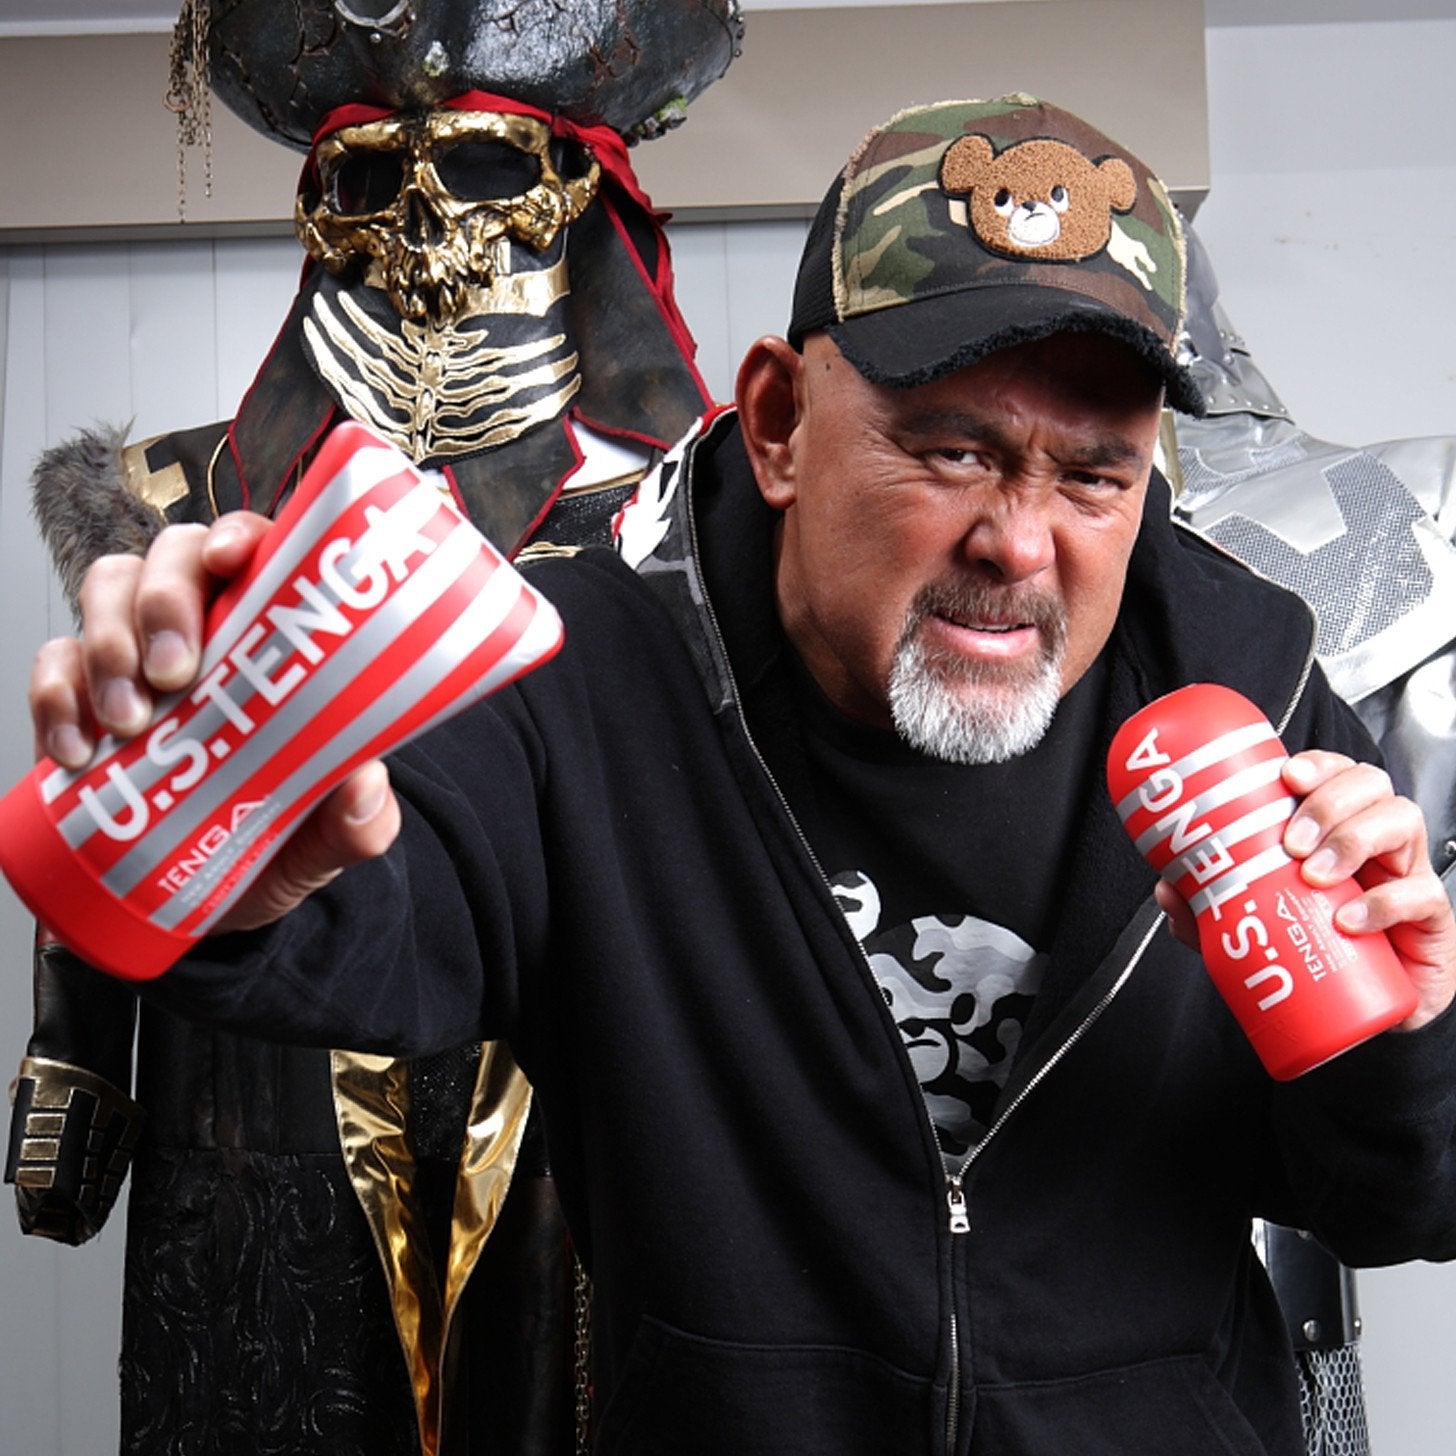 Keiji Mutoh of All Japan Pro Wrestling - more famously known in the west as WWE (then WWF)'s Great Muta! - UK TENGA STORE